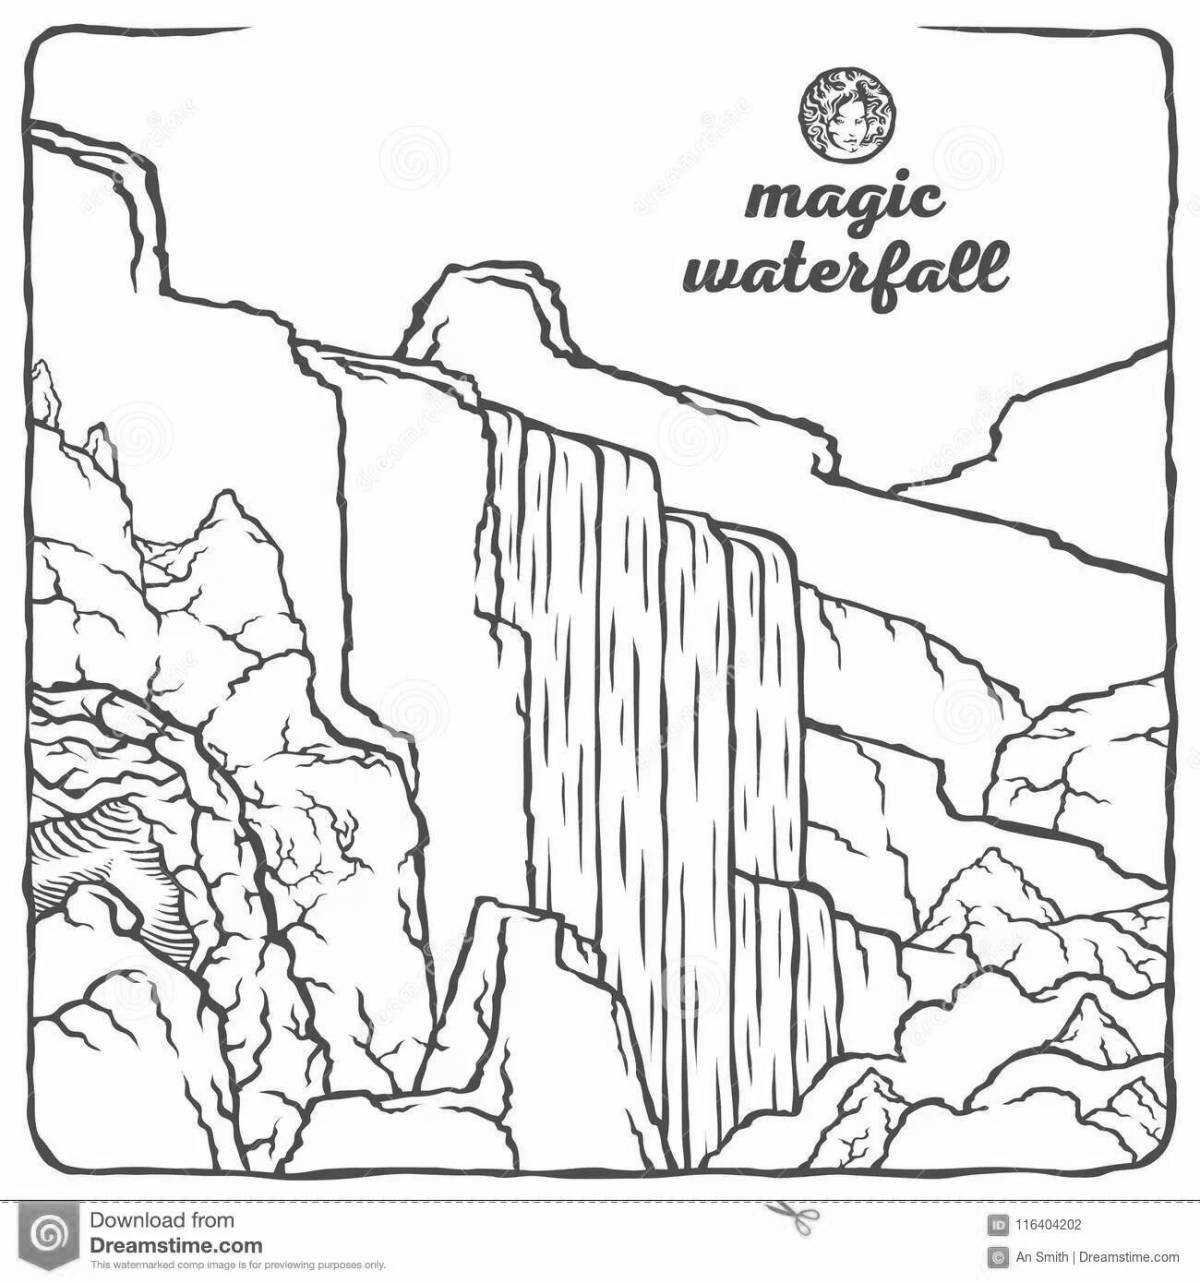 Gorgeous waterfall coloring book for kids